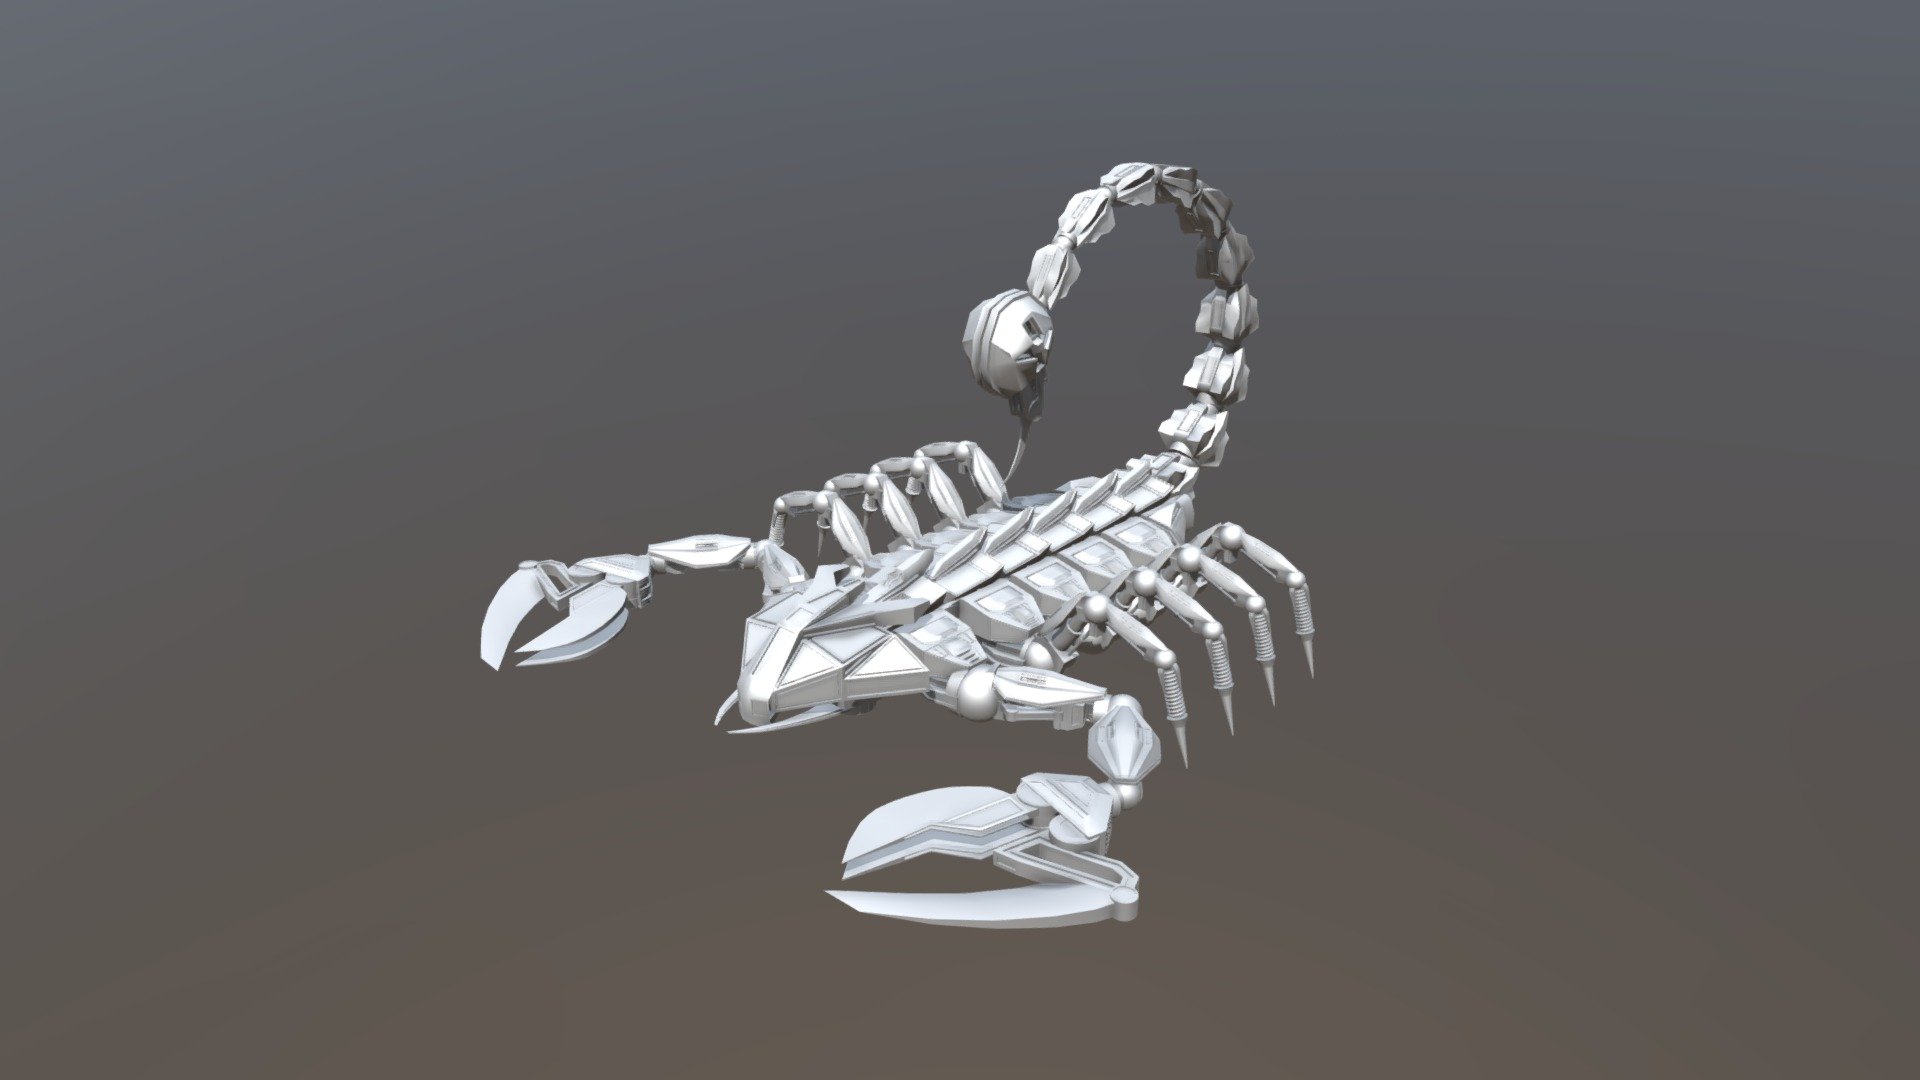 A mechanical Scorpion done for modeling class in school. Model was completely done in Blender 2.8. The goal was to make a cool, complex and interesting looking mechanical model without being concerned about the polycount etc 3d model